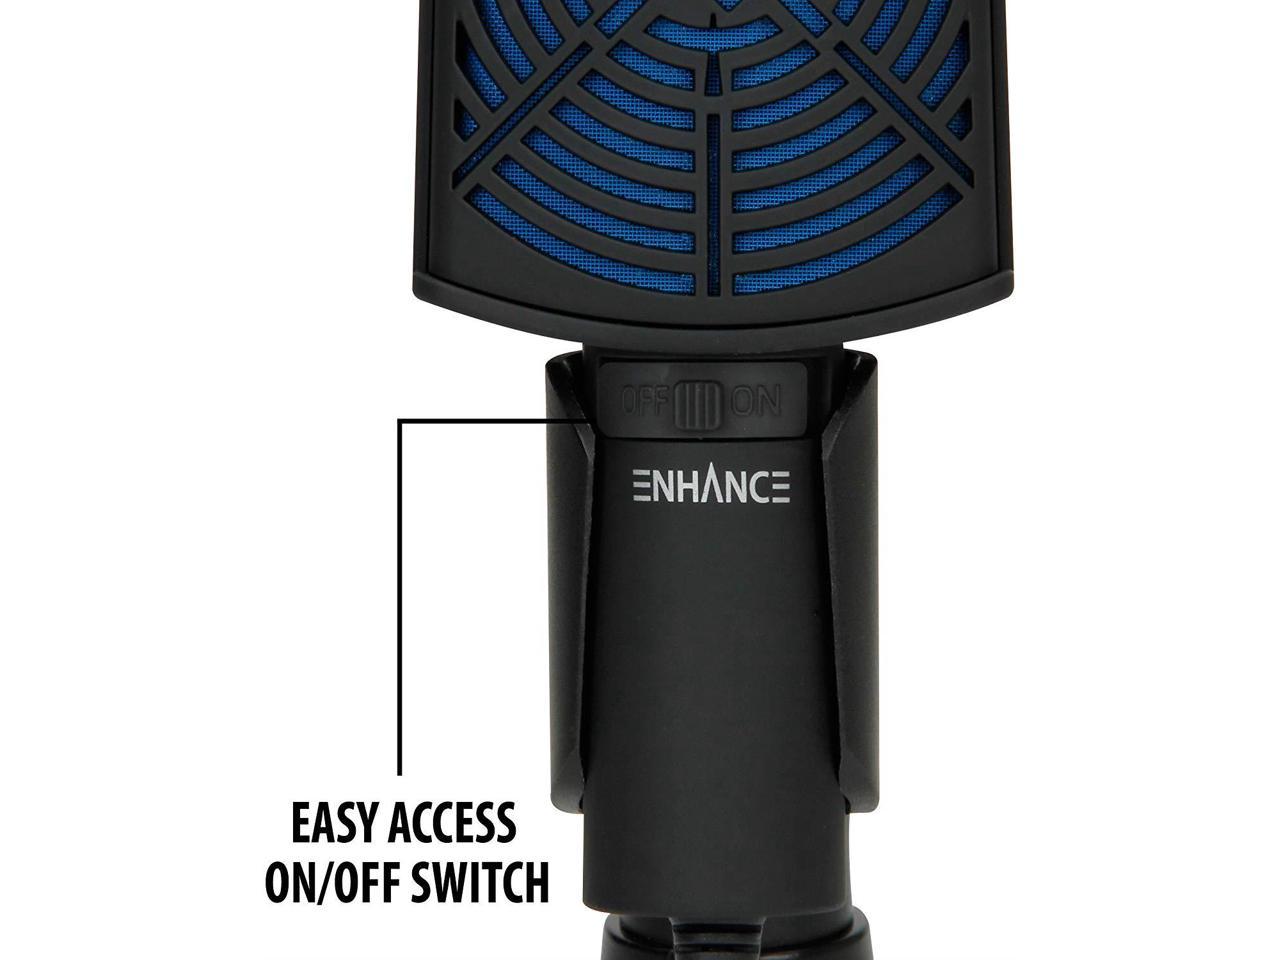 microphone for skype calls